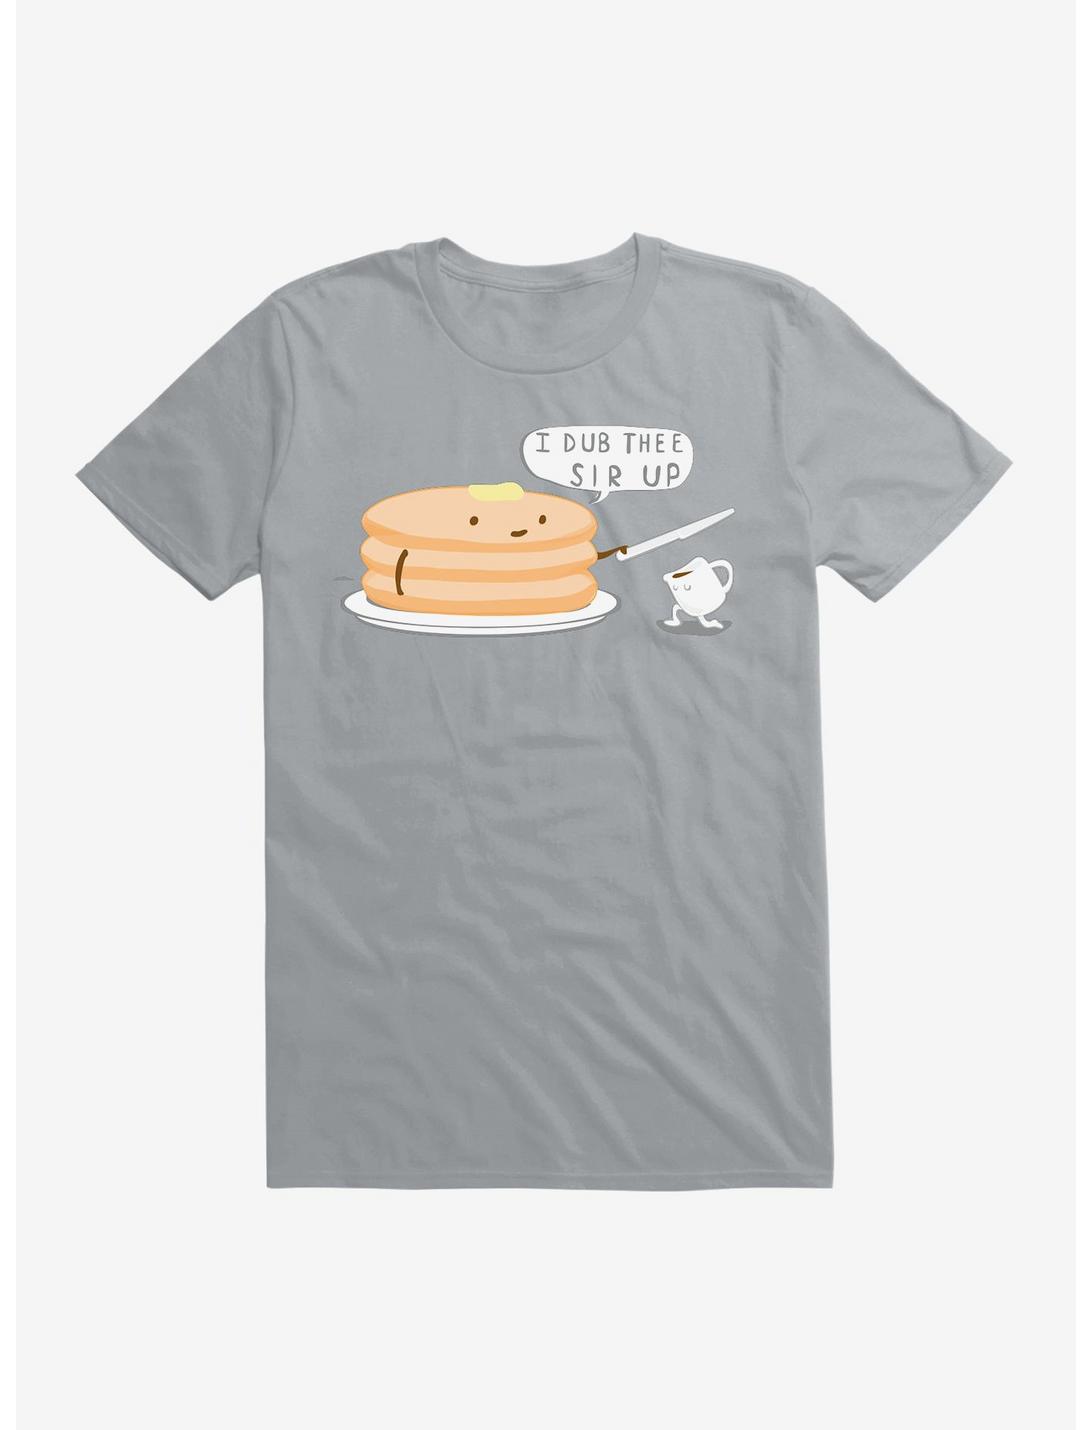 Knight Of The Breakfast Table! T-Shirt, SILVER, hi-res